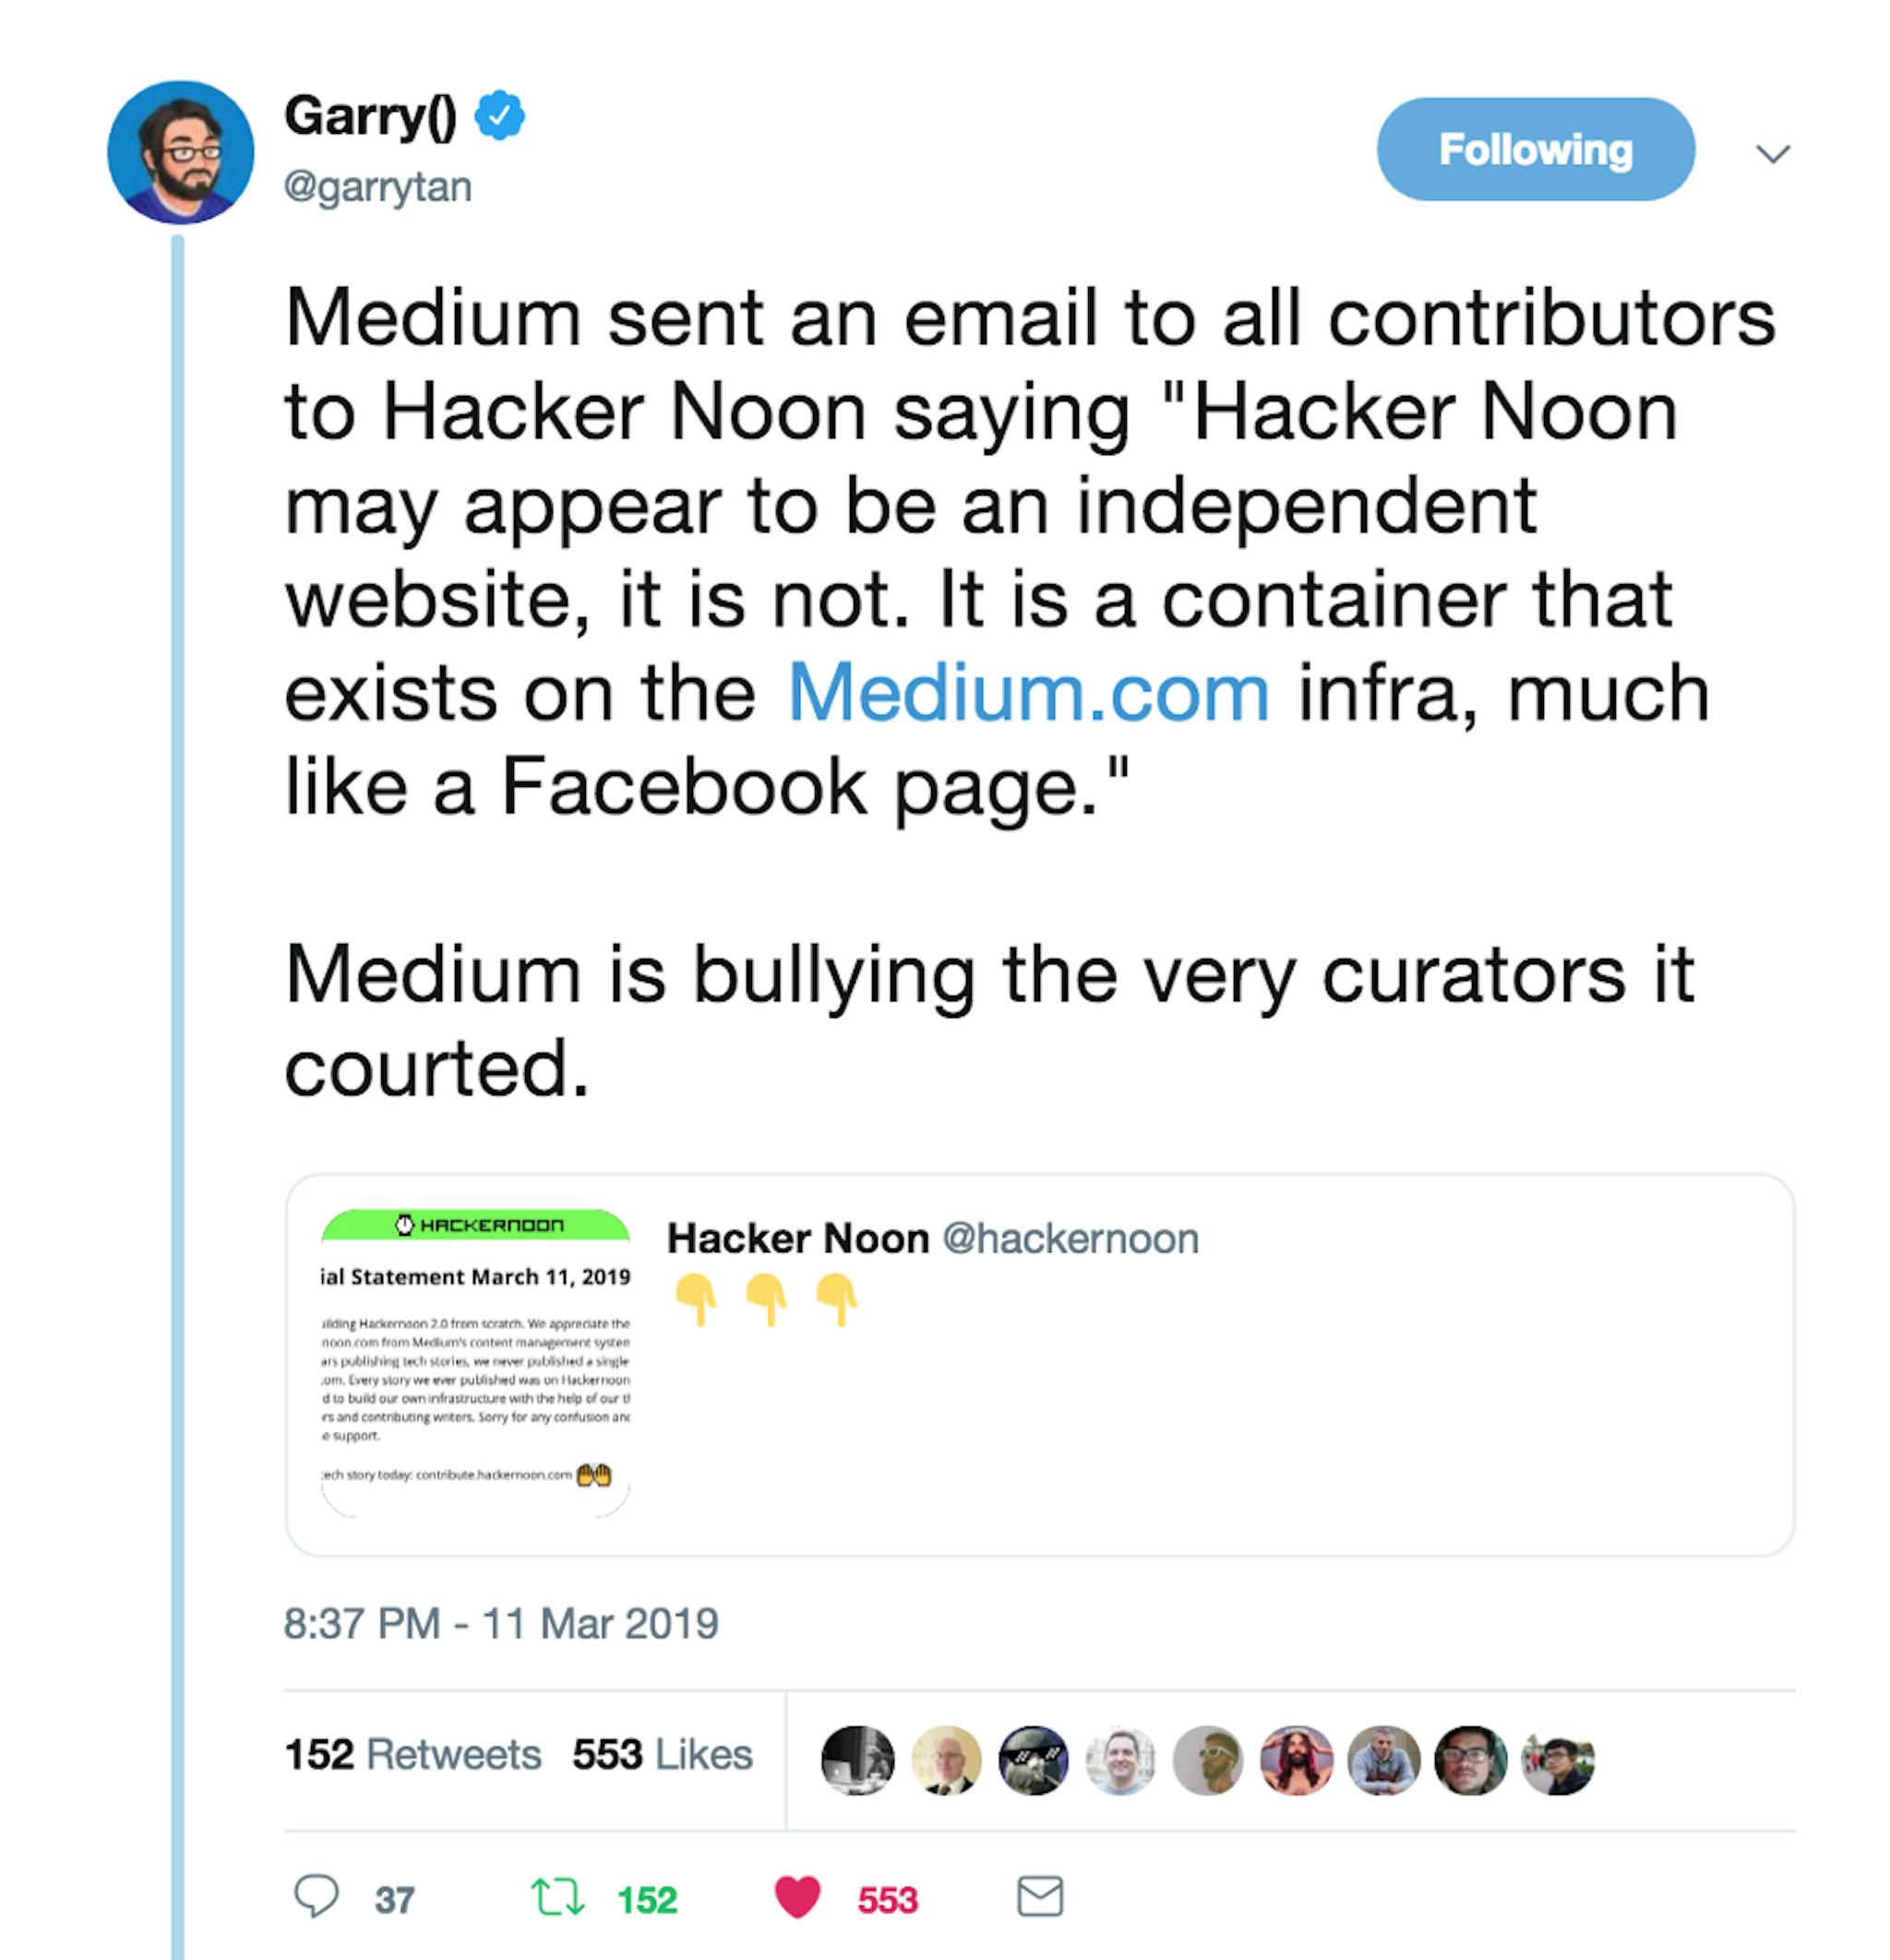 featured image - About Removing Medium from Hackernoon.com